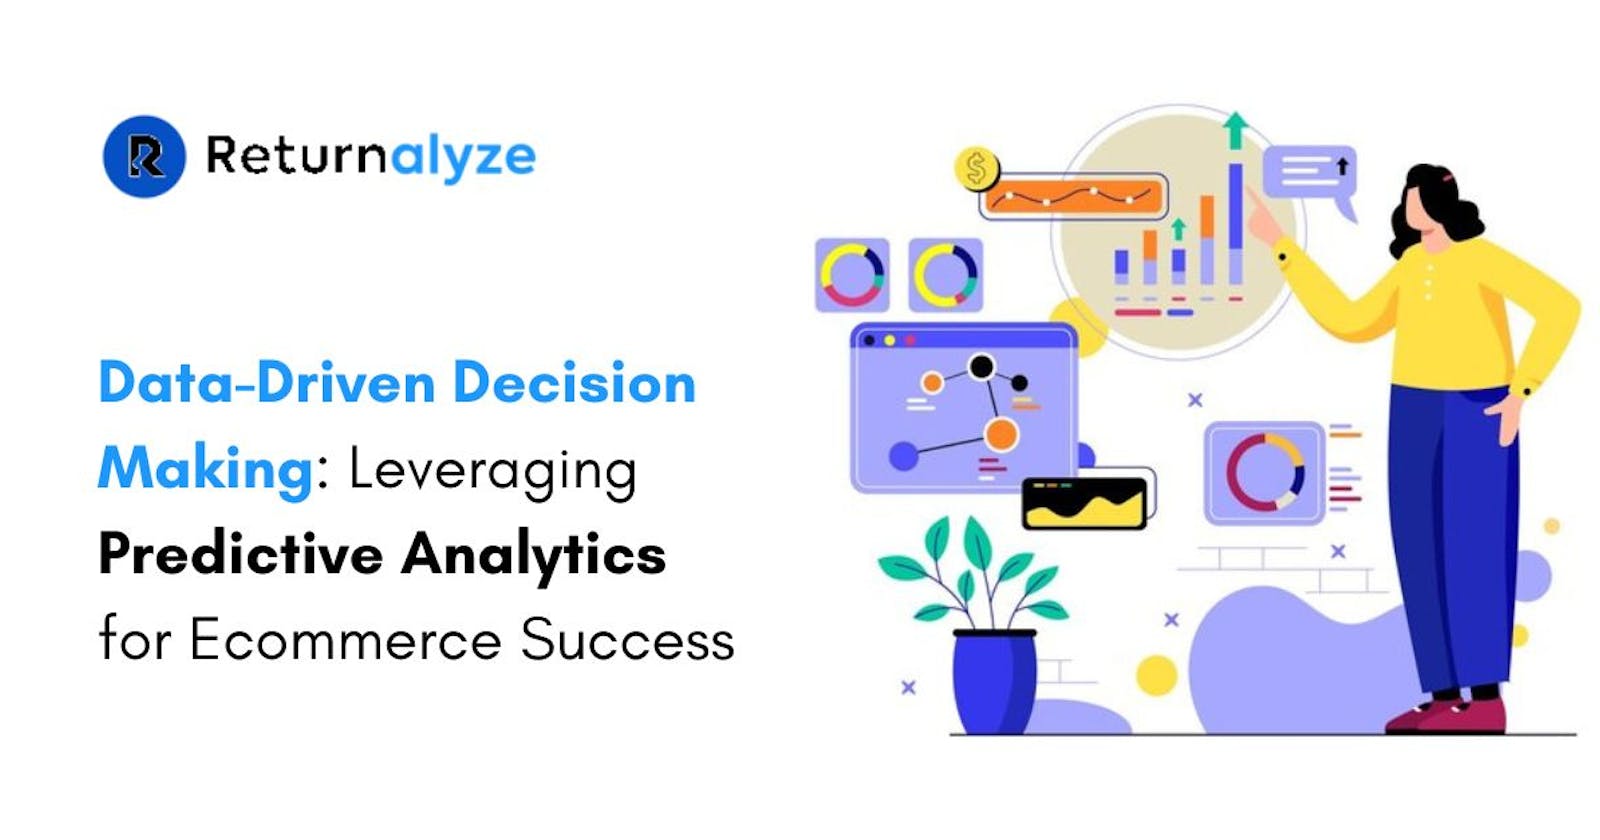 Grow your Ecommerce Business by Mastering Predictive Analytics for Data-Driven Decision Making